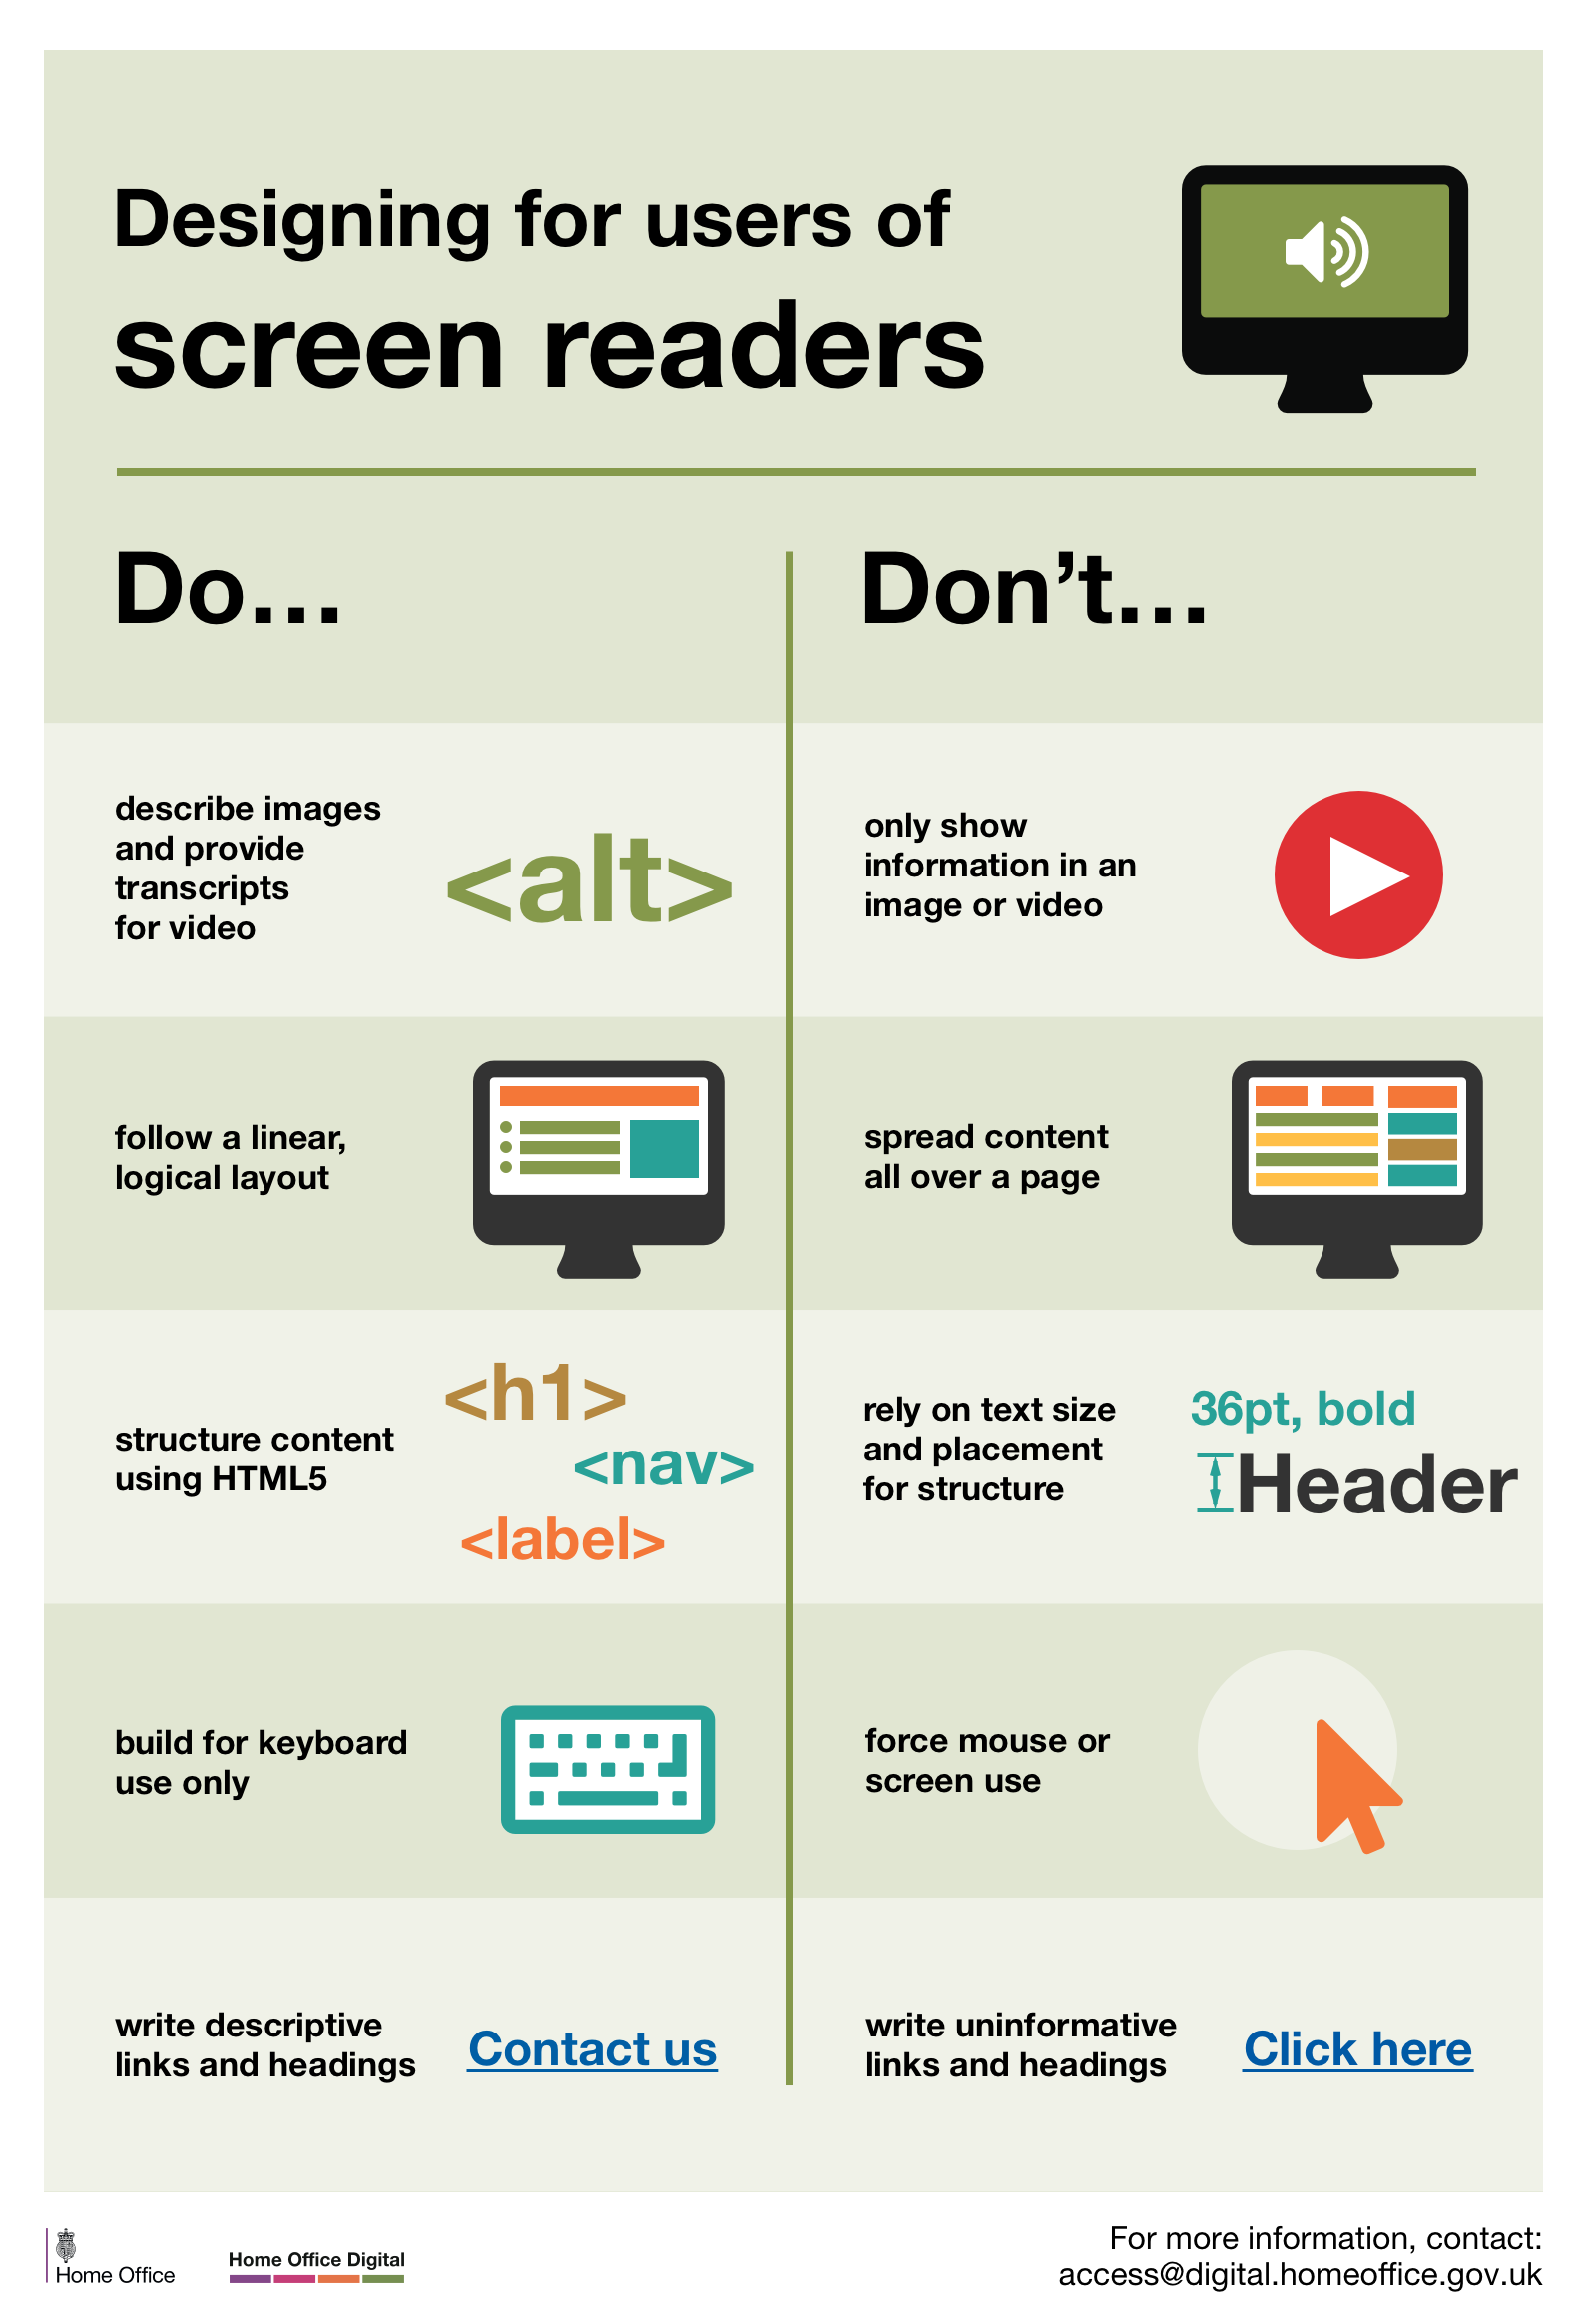 poster showing do and dont for screen readers